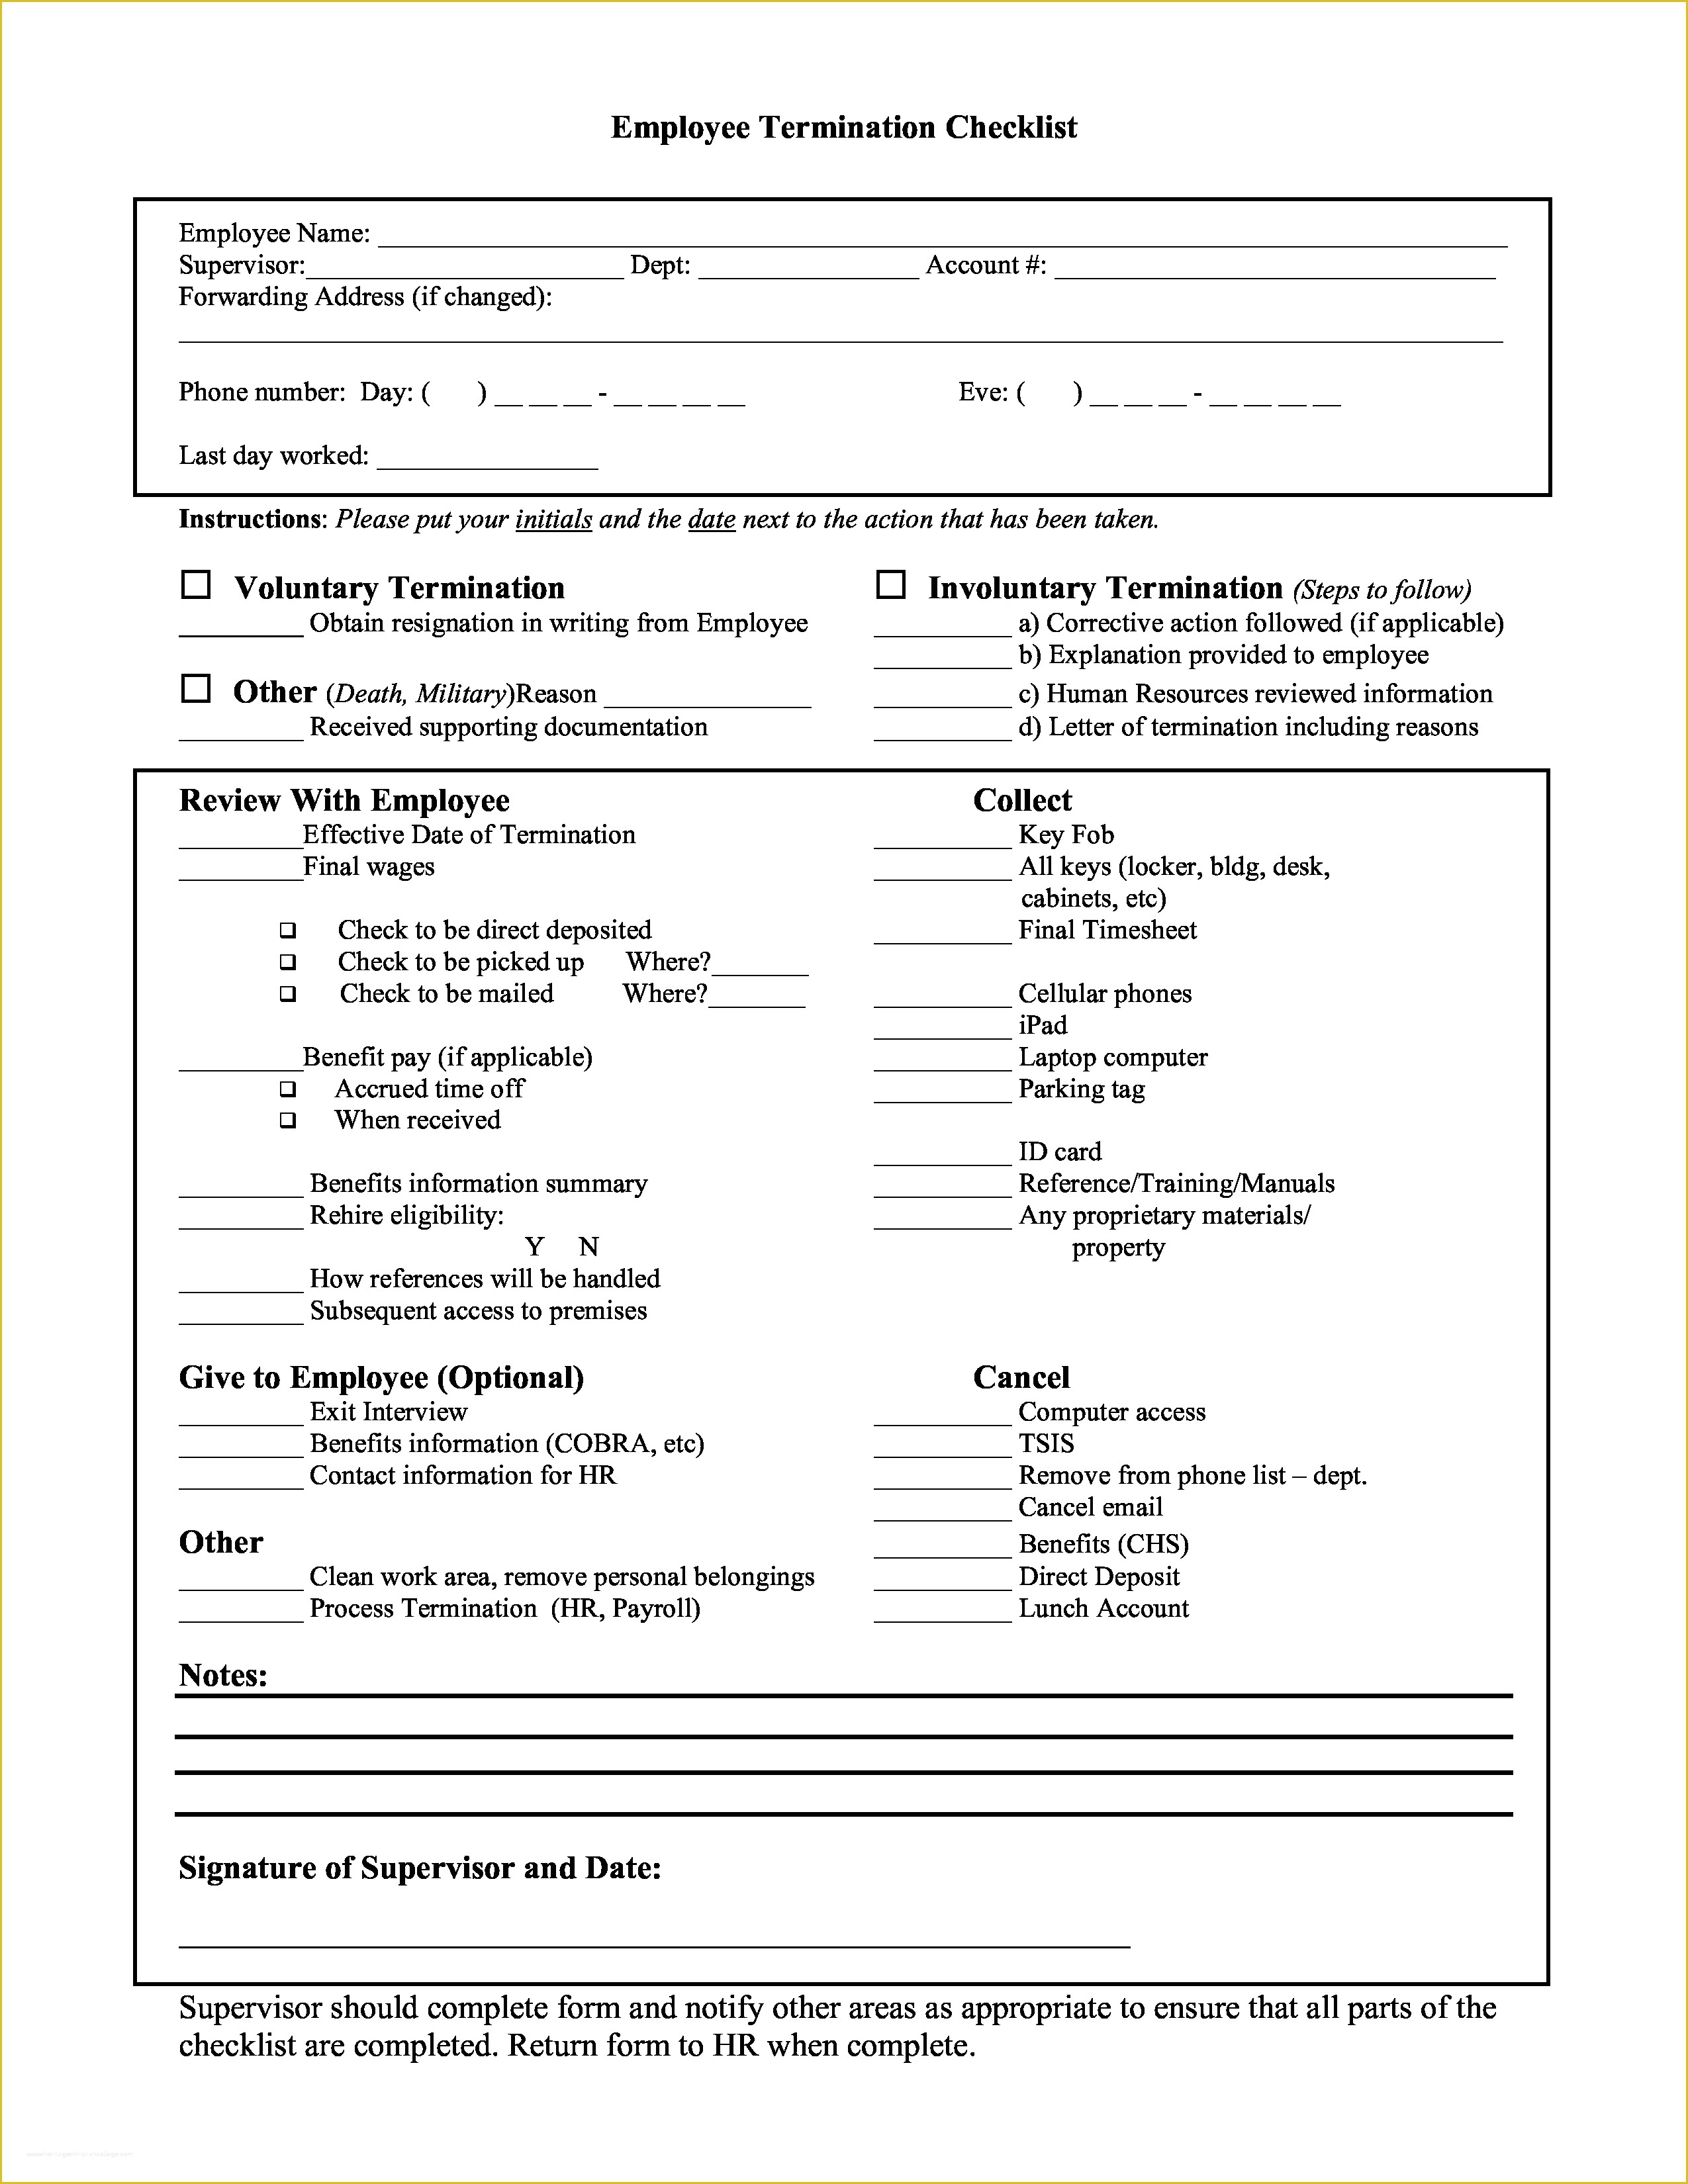 Termination form Template Free Of Free Employee Termination Checklist form